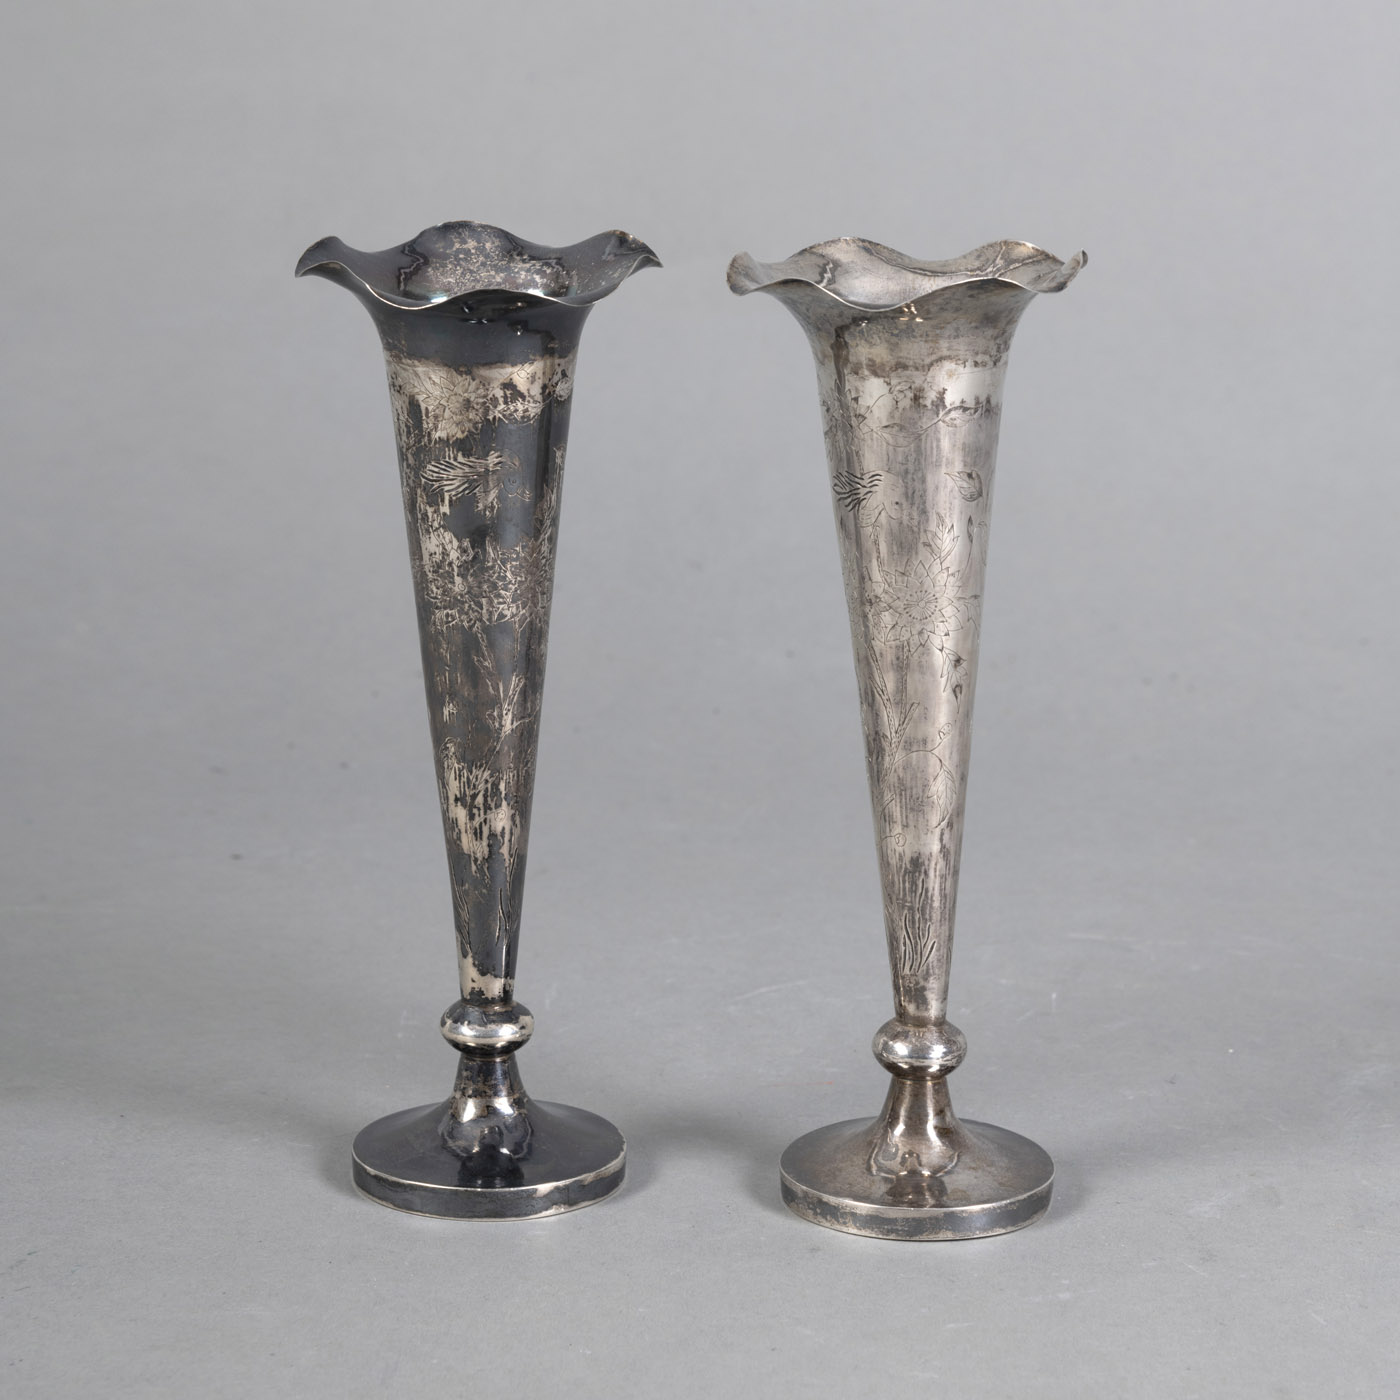 <b>A PAIR OF SLENDER SILVER VASES ENGRAVED WITH FLORAL AND BIRD DECORATION</b>